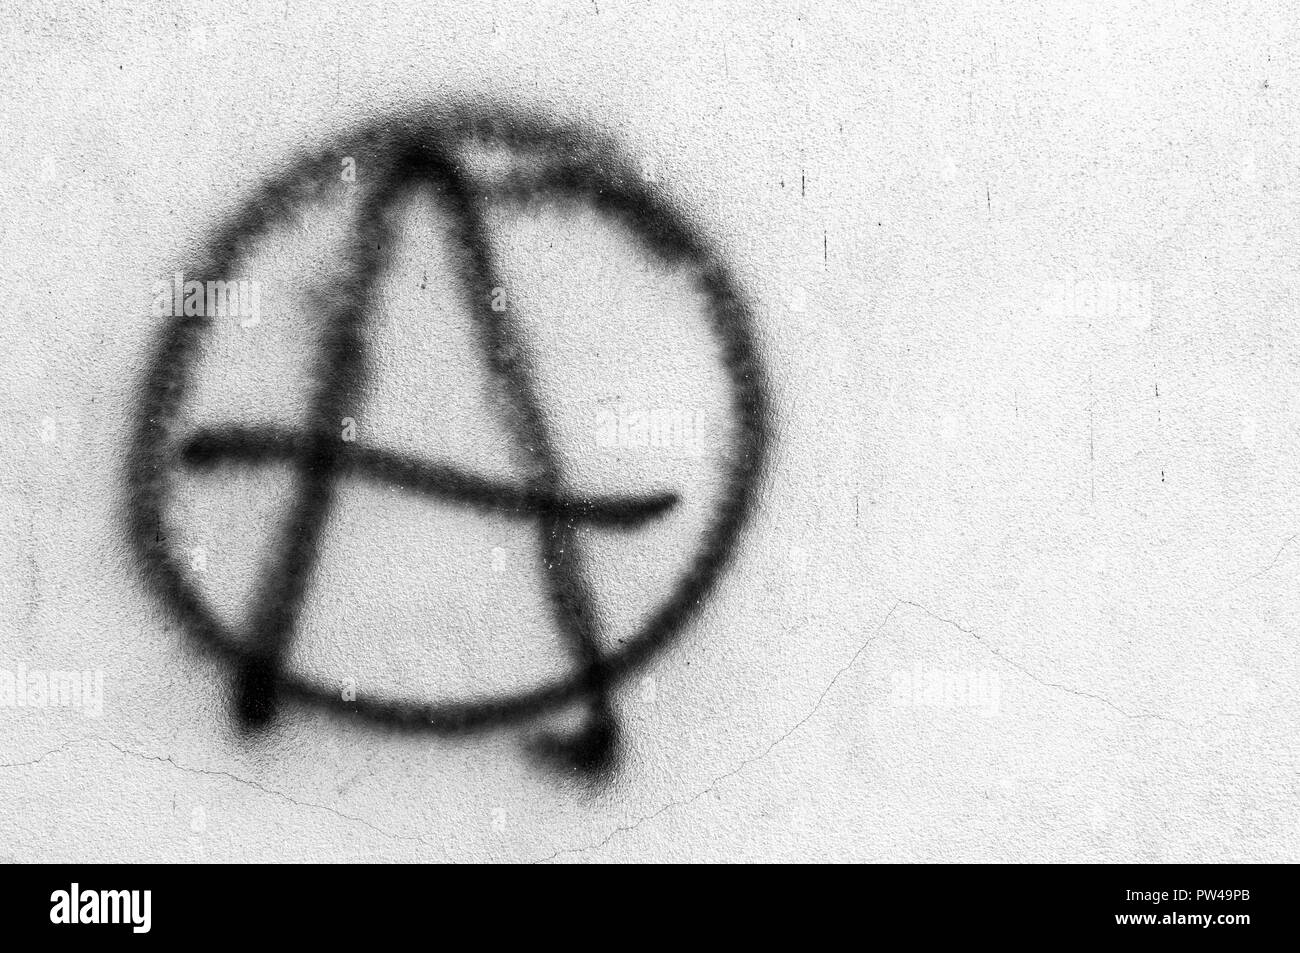 Symbol of Anarchy painted on a gray concrete wall. Ideal for concepts and backgrounds. Space for text. Stock Photo